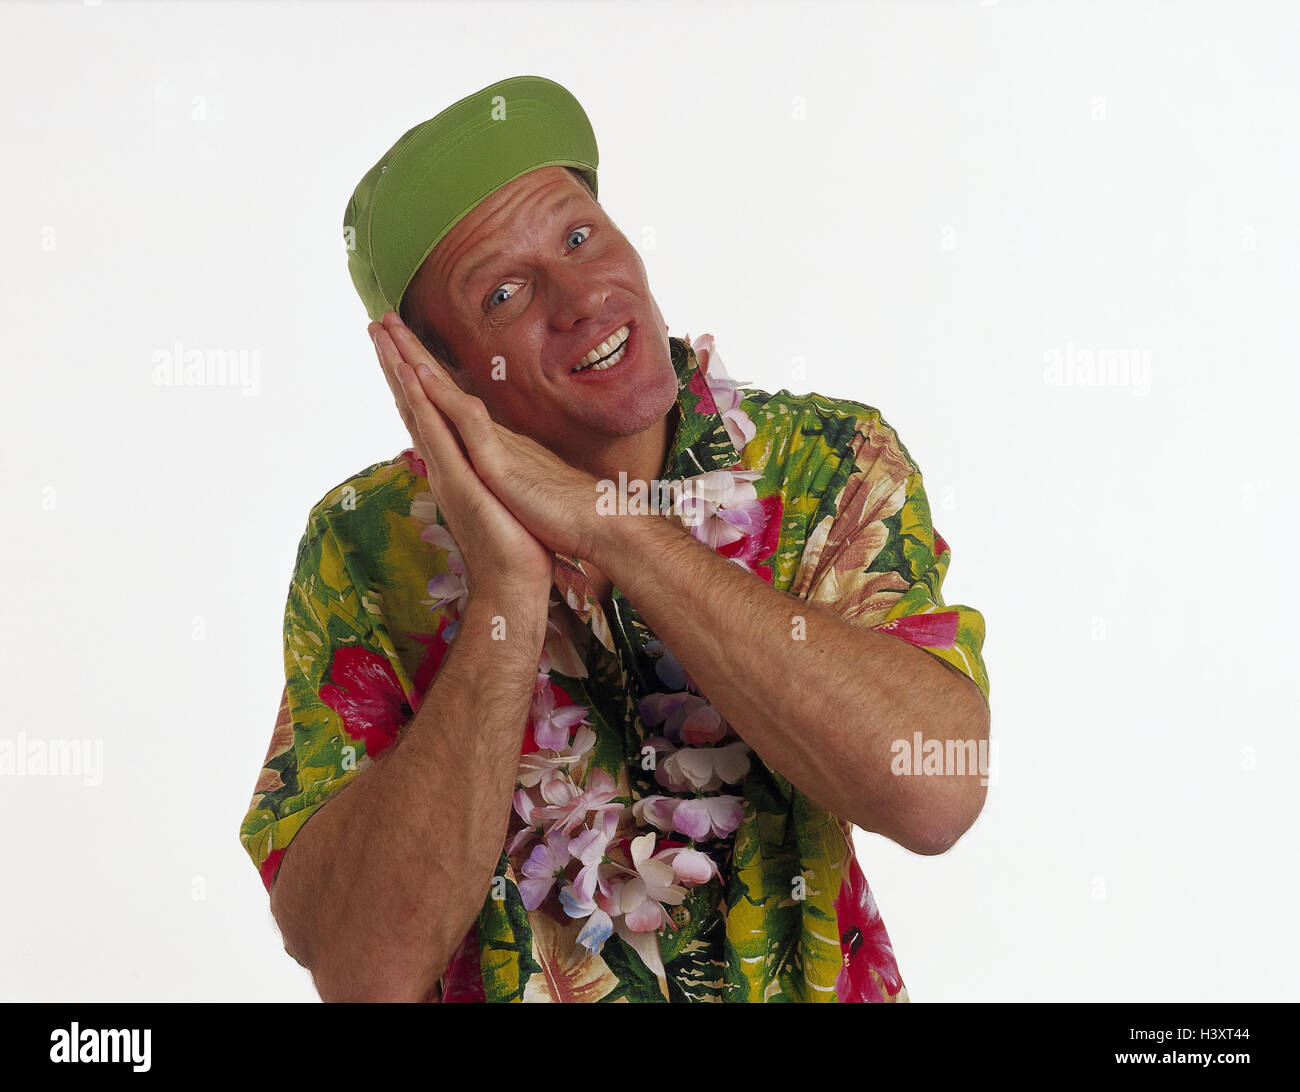 Tourist, Hawaii shirt, cap, gesture, tiredly, sleep, portrait, Holiday, vacation, studio, cut out, man, vacationer, flower catena, Lei, fatigue, overnight stay, place to sleep, sleep, accomodation, near, Stock Photo